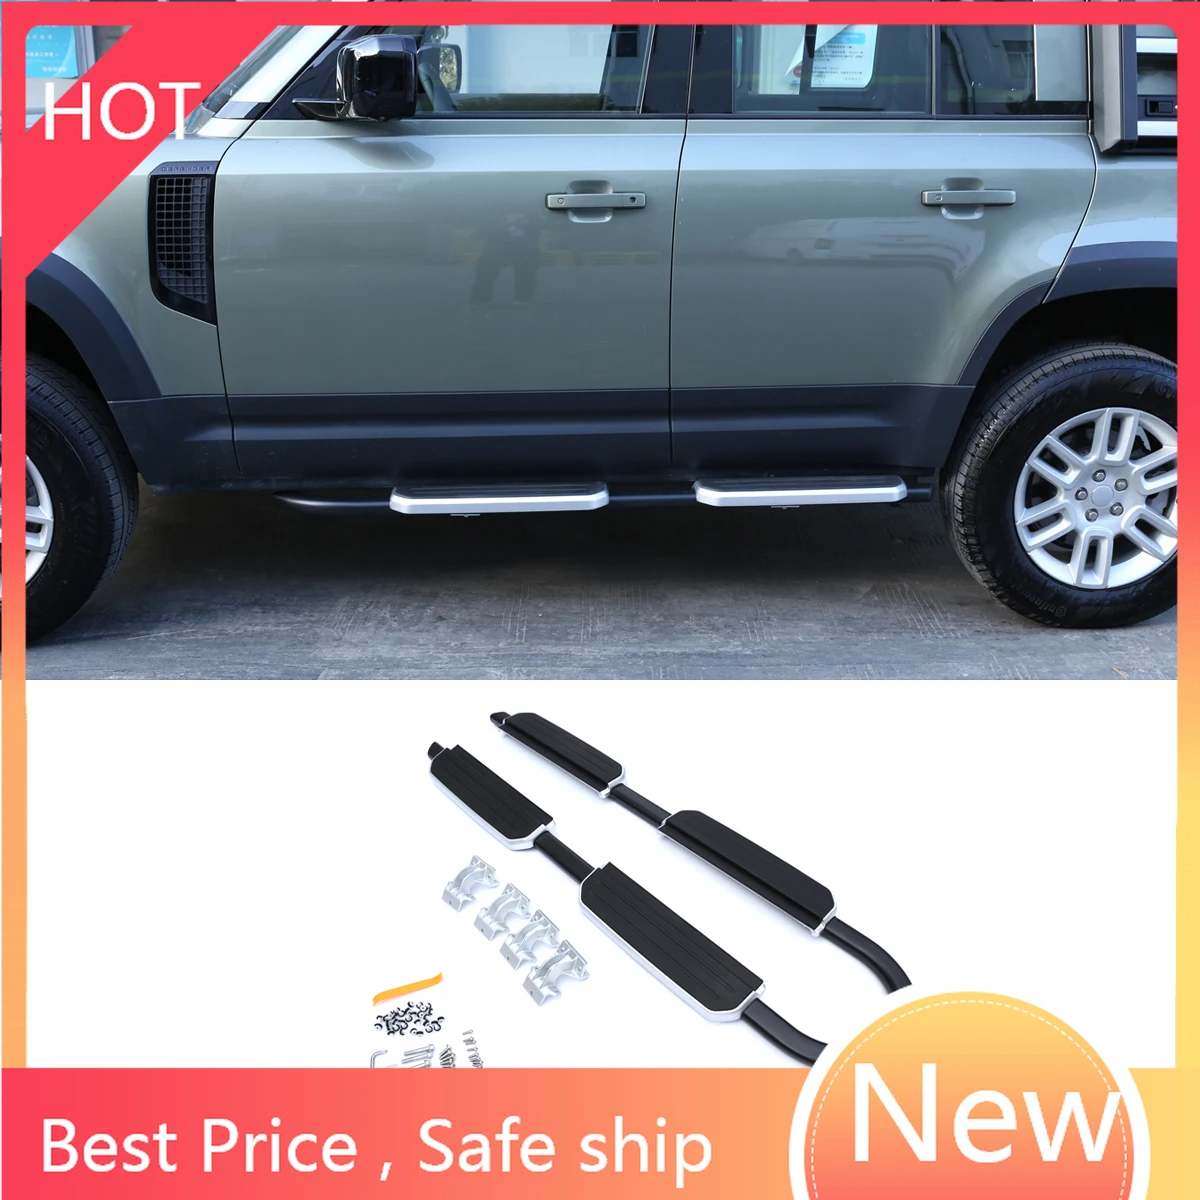 

For Land Rover Defender 110 130 2020 2021 Car Exterior Door Car Body Edge Stable Side Pedal Car Accessories HU